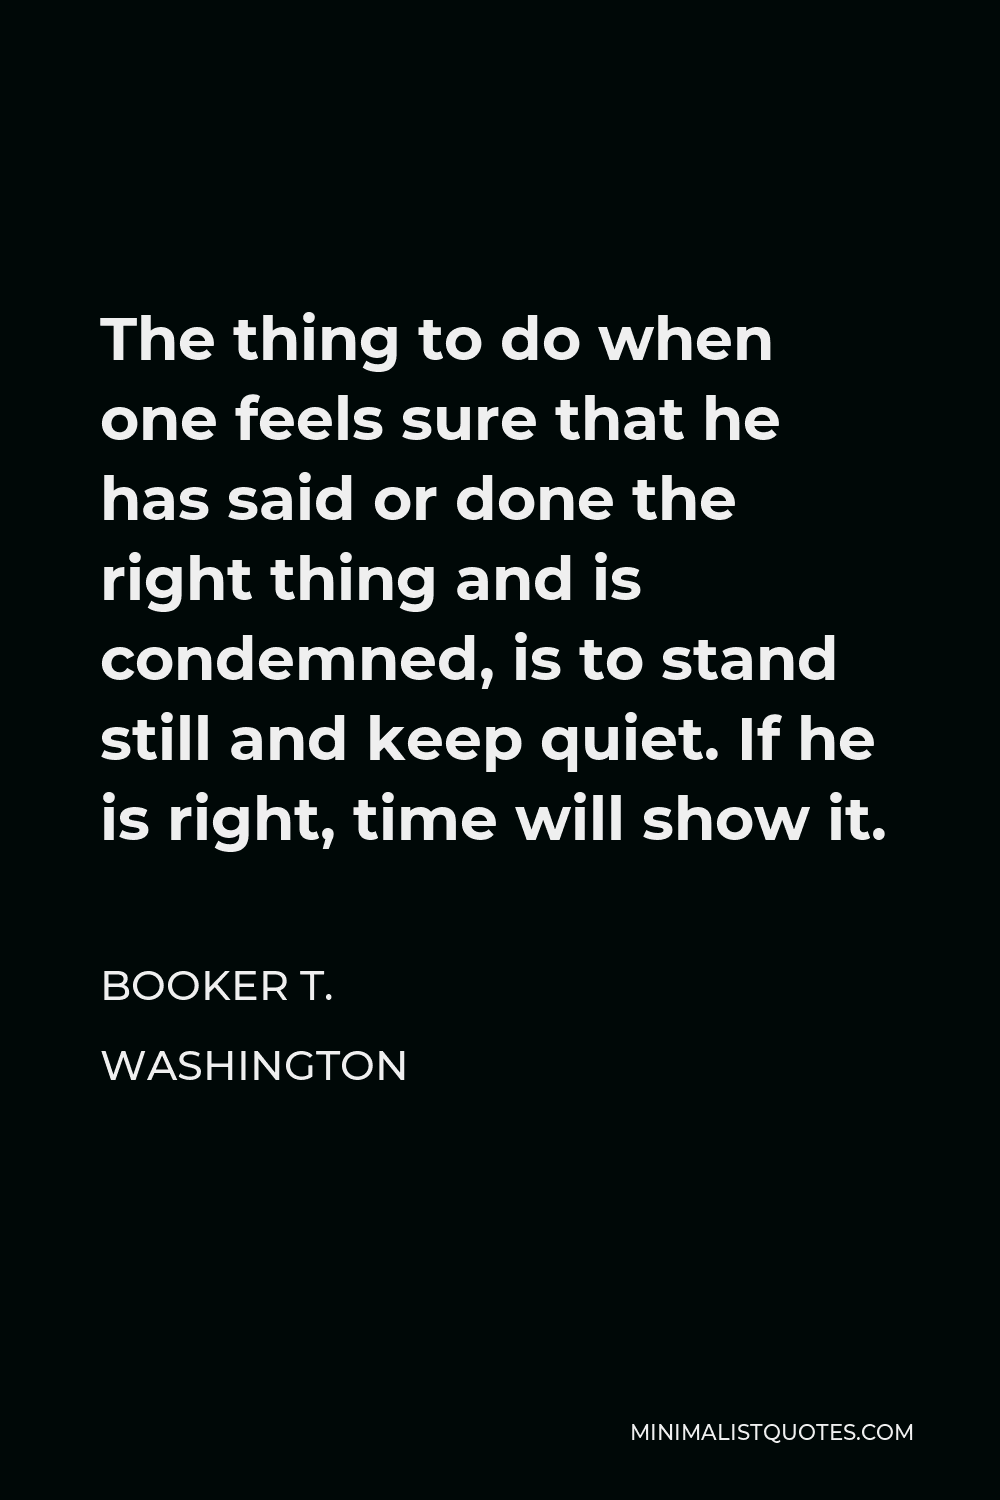 Booker T. Washington Quote - The thing to do when one feels sure that he has said or done the right thing and is condemned, is to stand still and keep quiet. If he is right, time will show it.